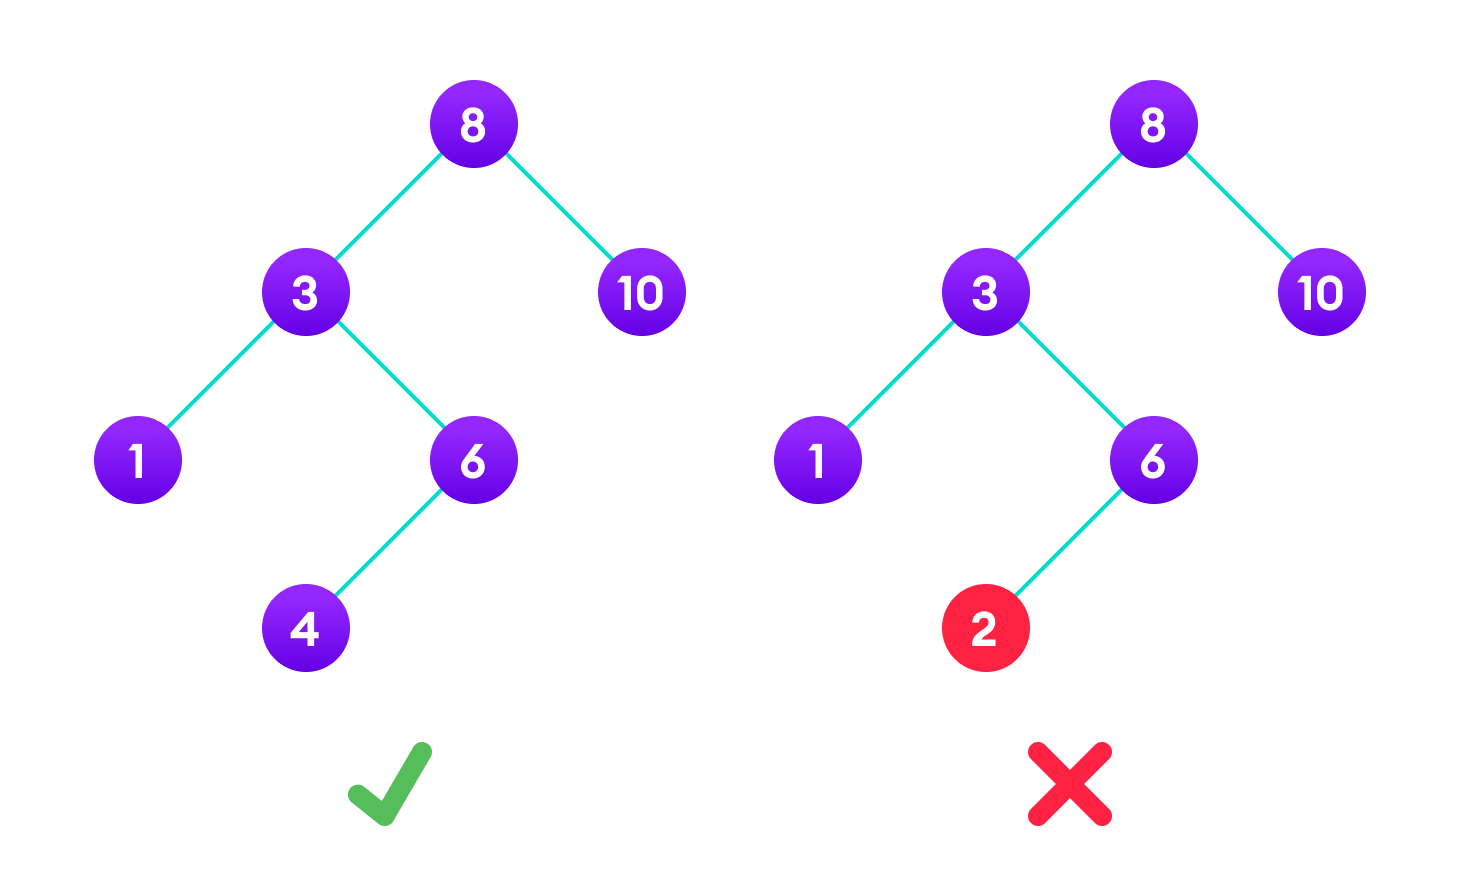 A tree having a right subtree with one value smaller than the root is shown to demonstrate that it is not a valid binary search tree